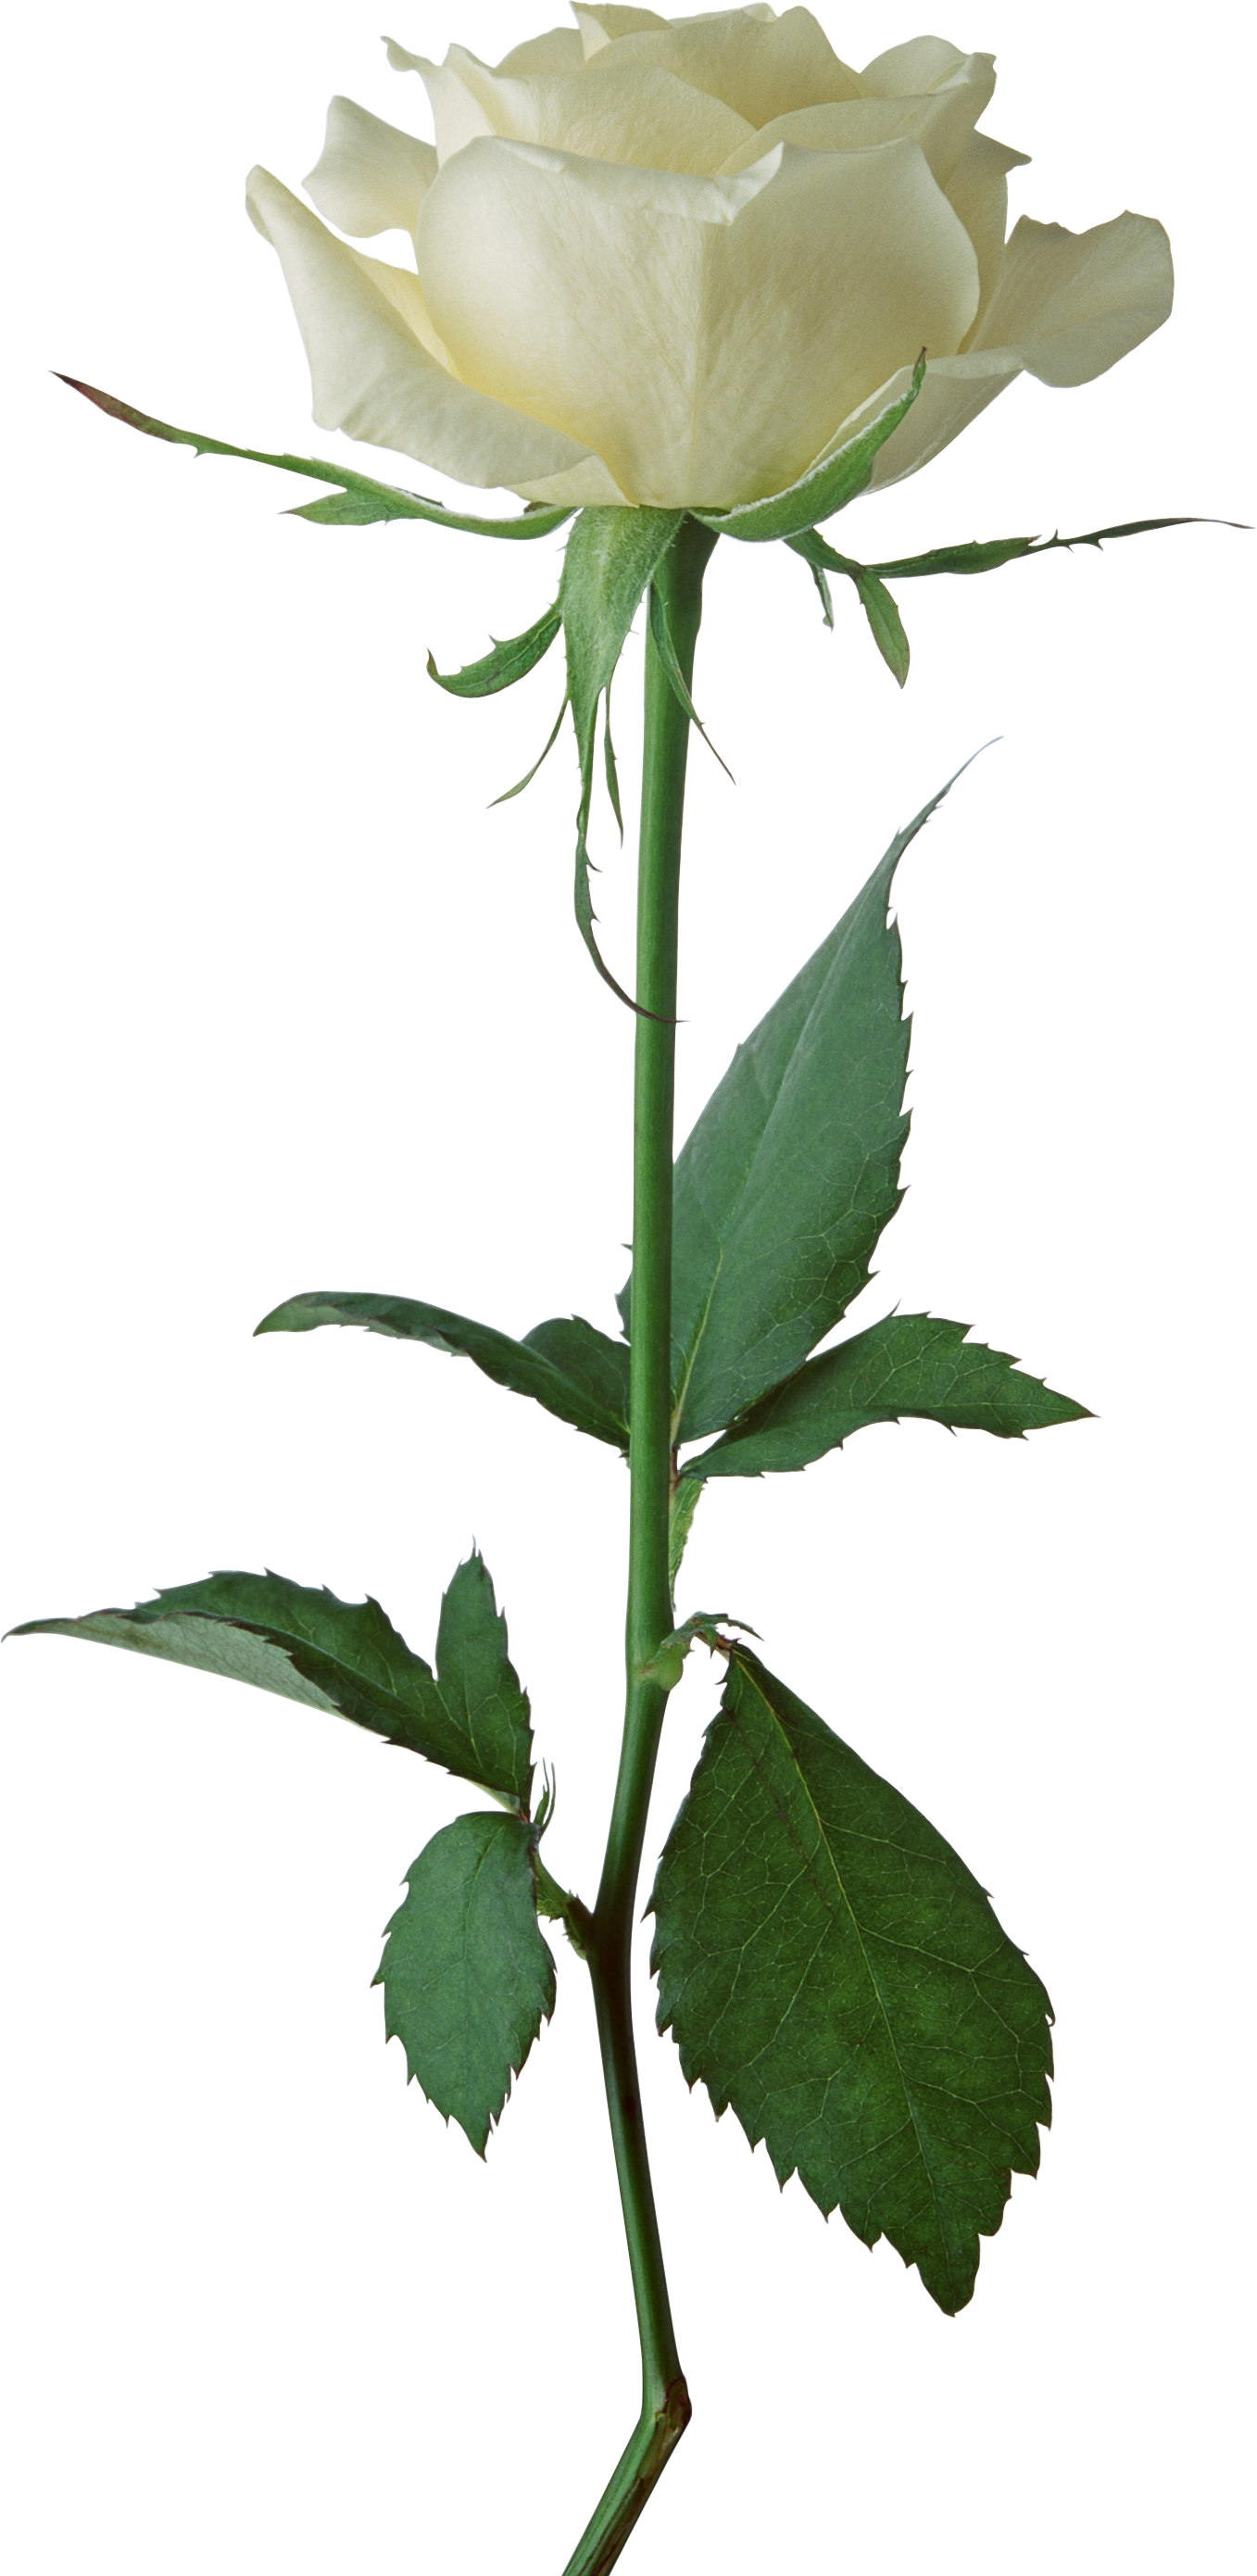 Flower stem png. White rose image picture